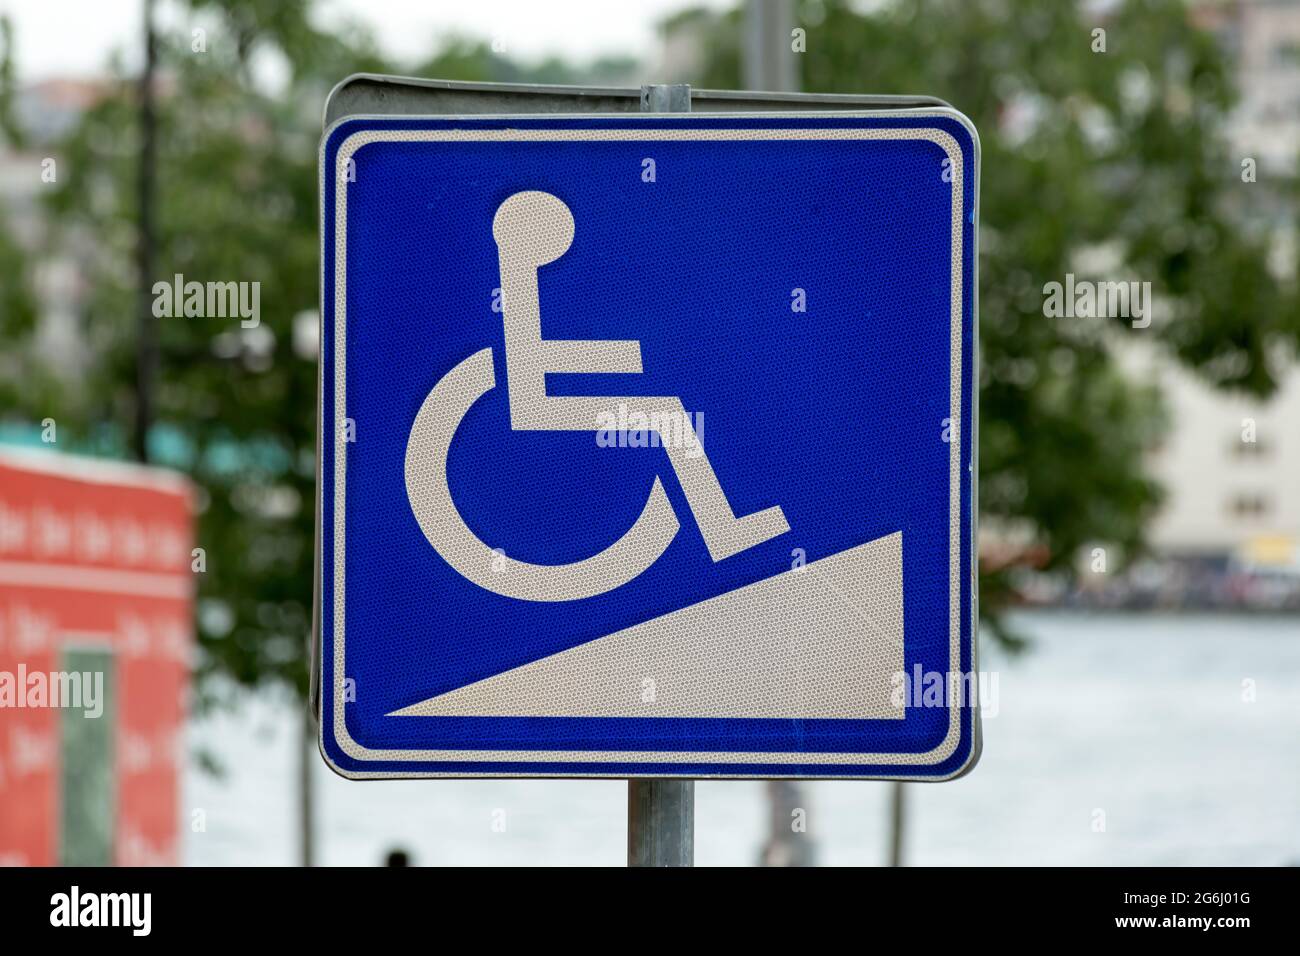 Disabled Ramp Access Sign in the city. Green foliage in the background. Stock Photo